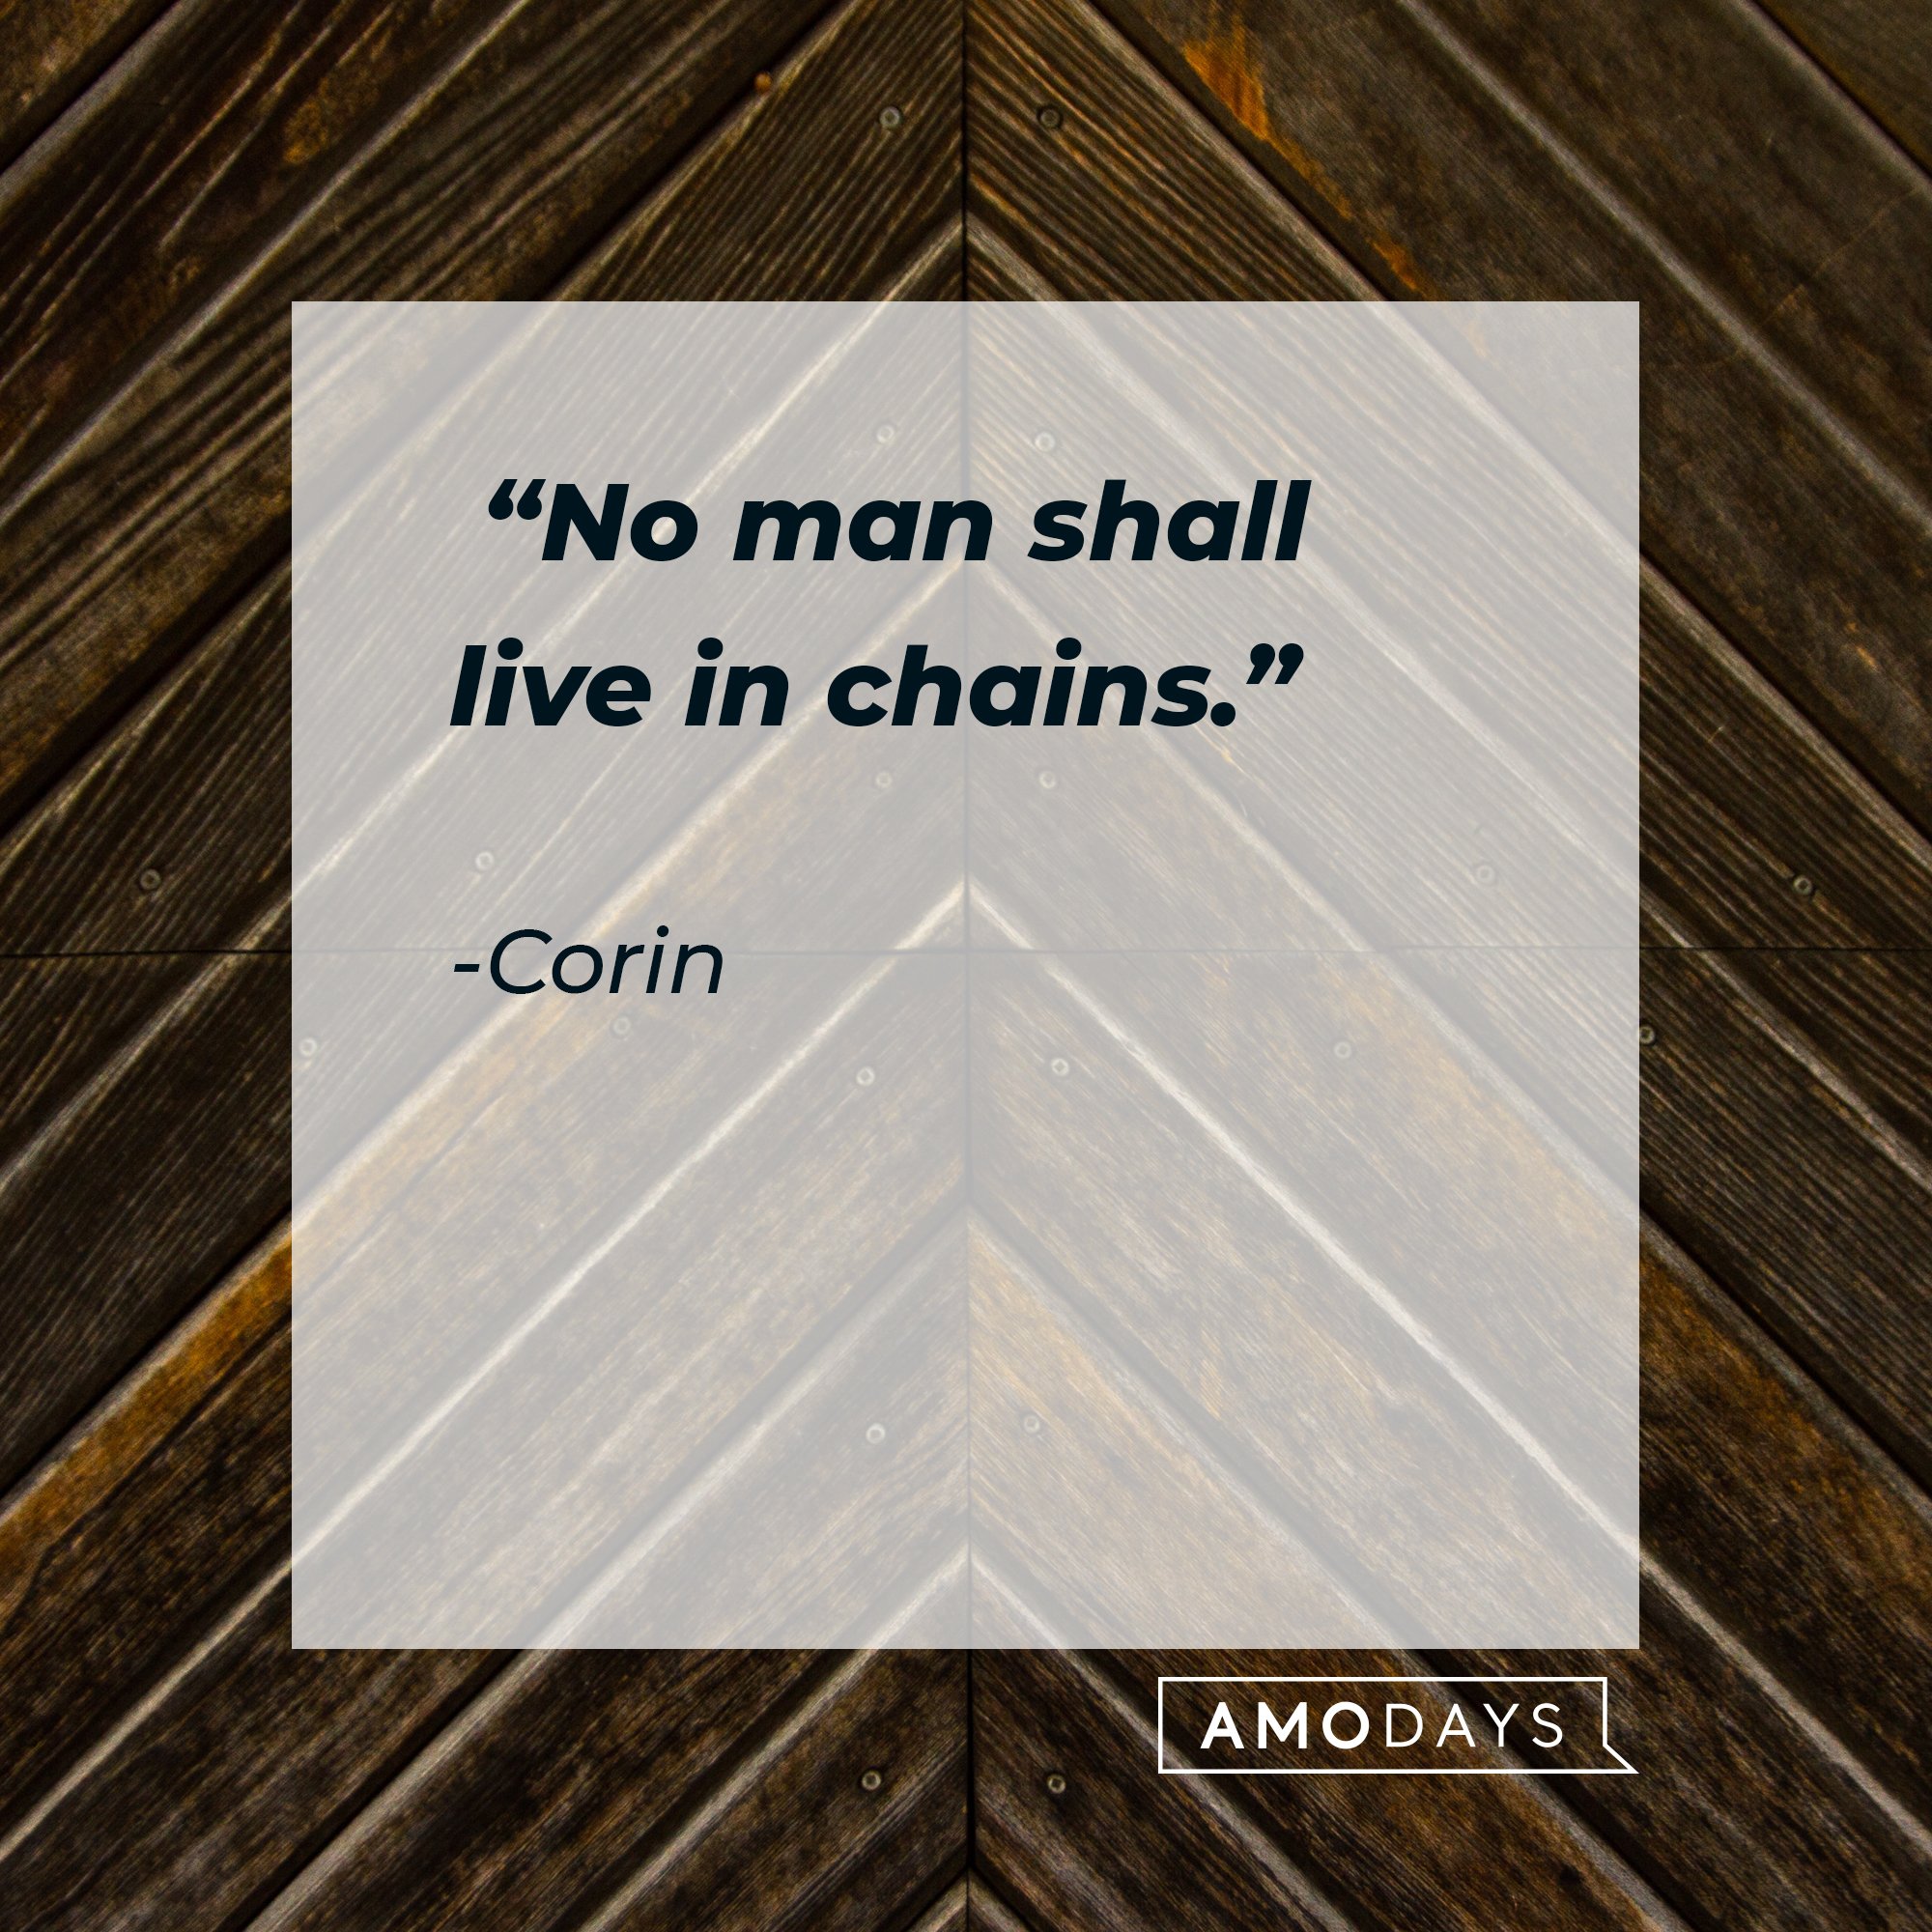 Conan's quote: “No man shall live in chains.” | Image: AmoDays